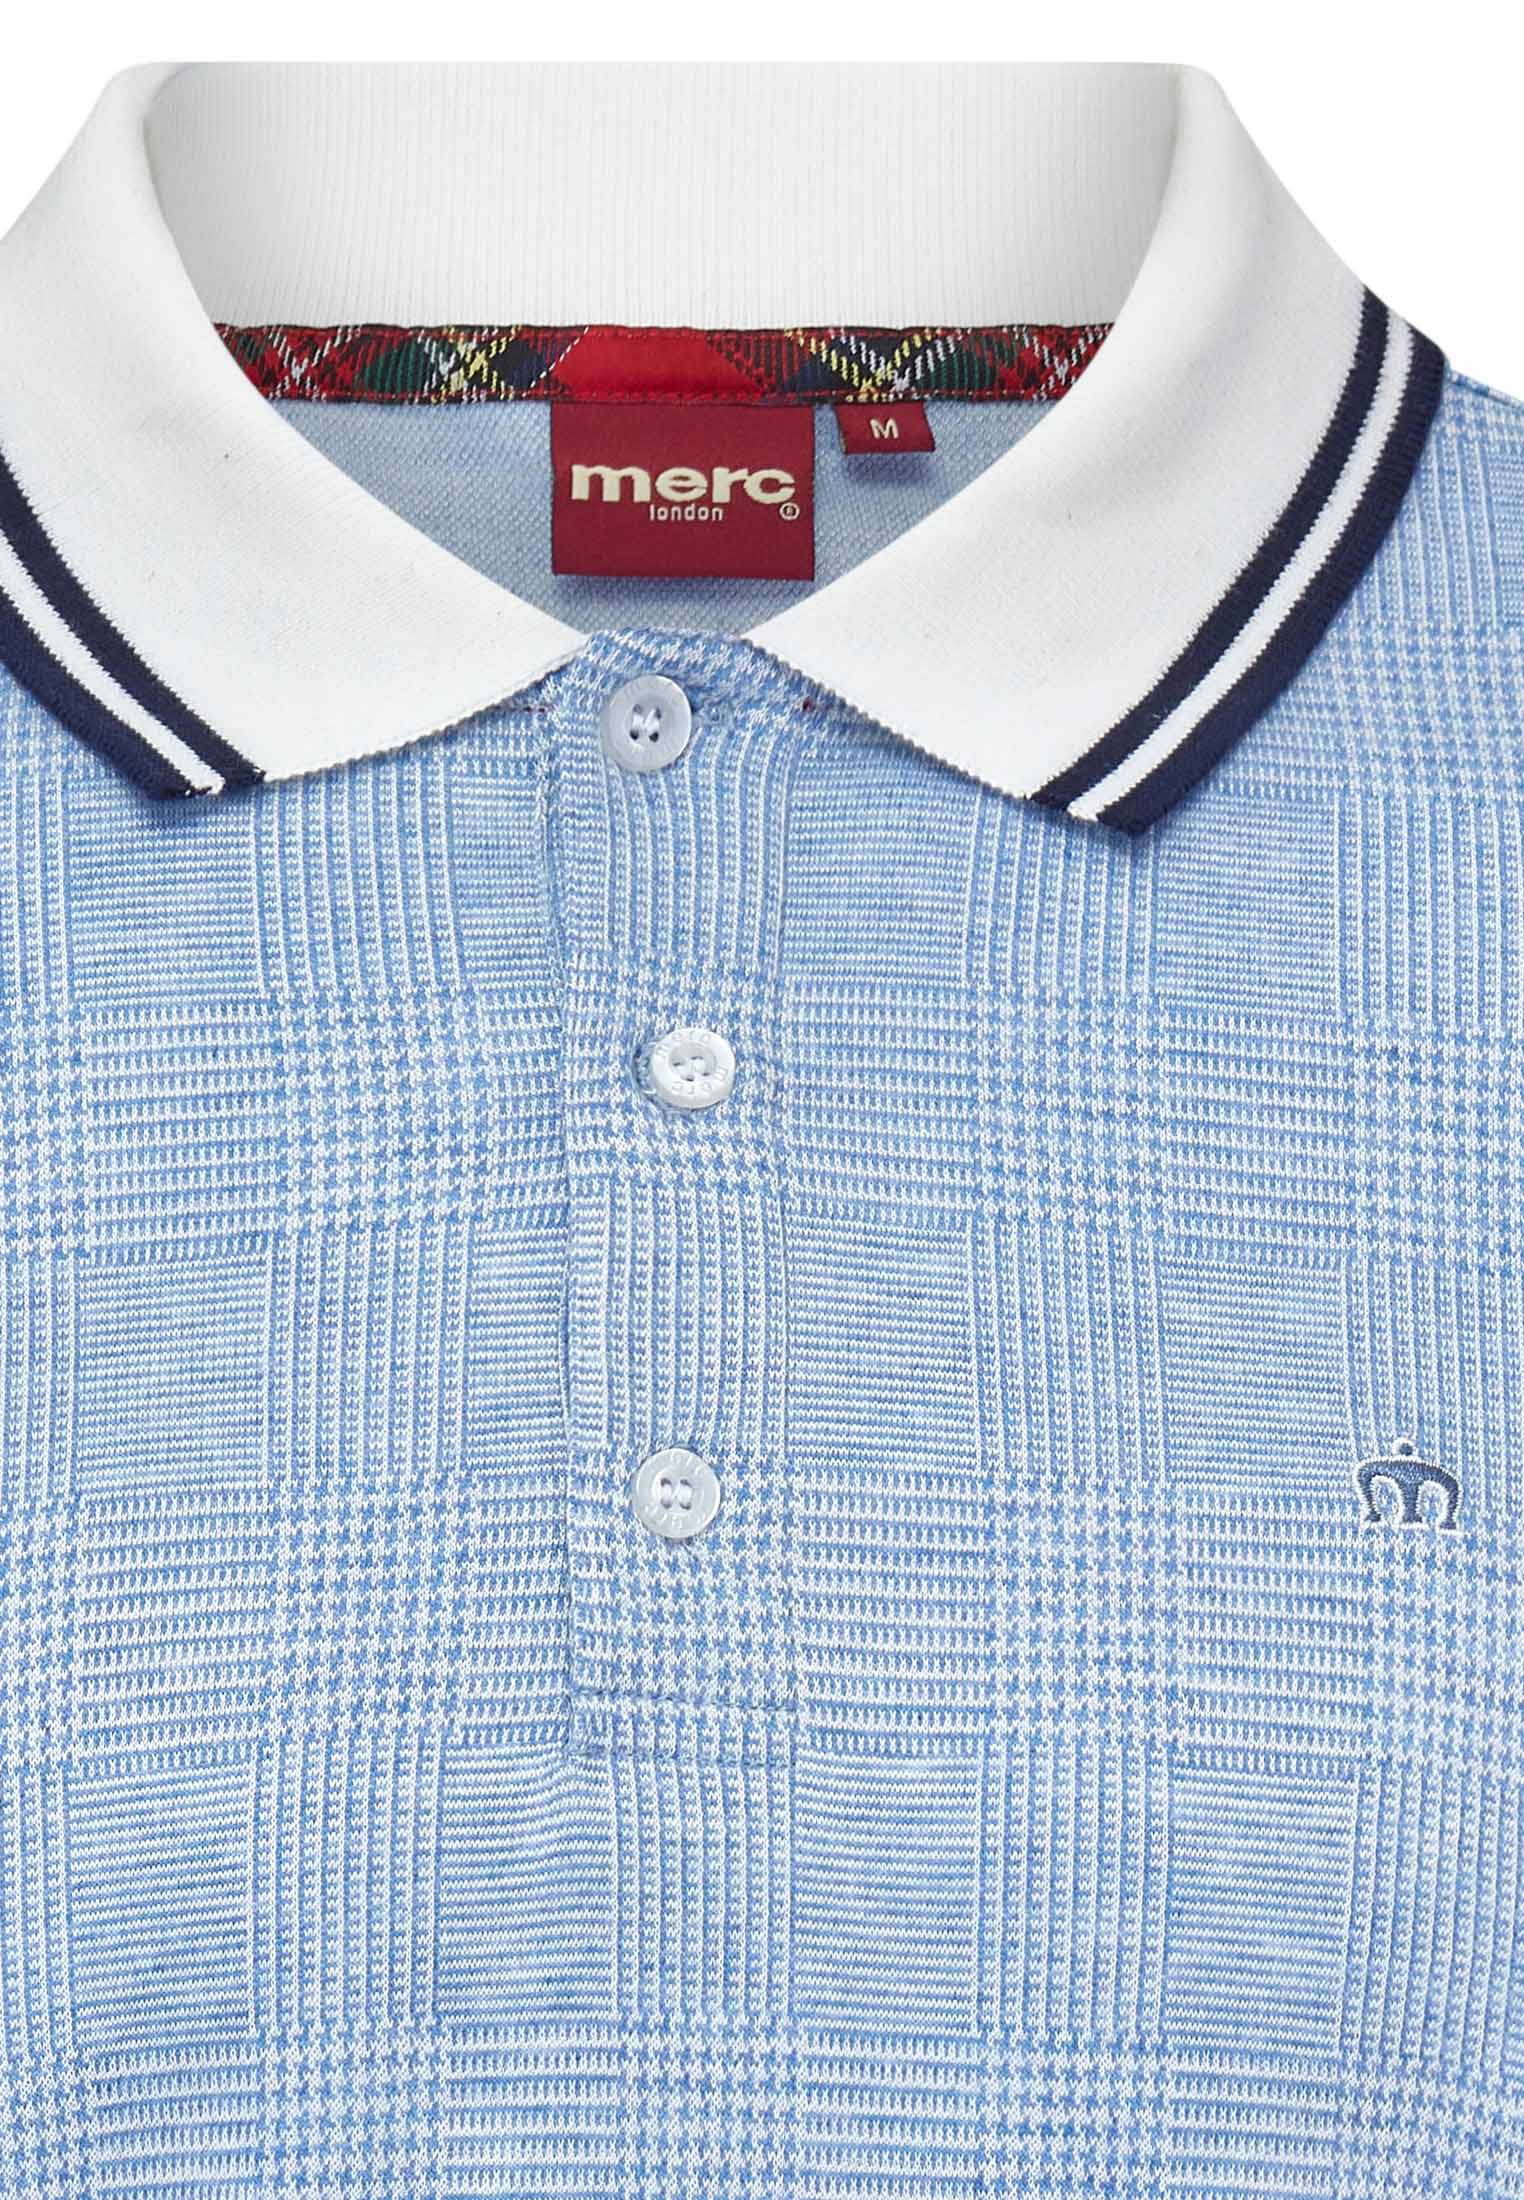 Prince of Wales Check Polo Shirt in Blue